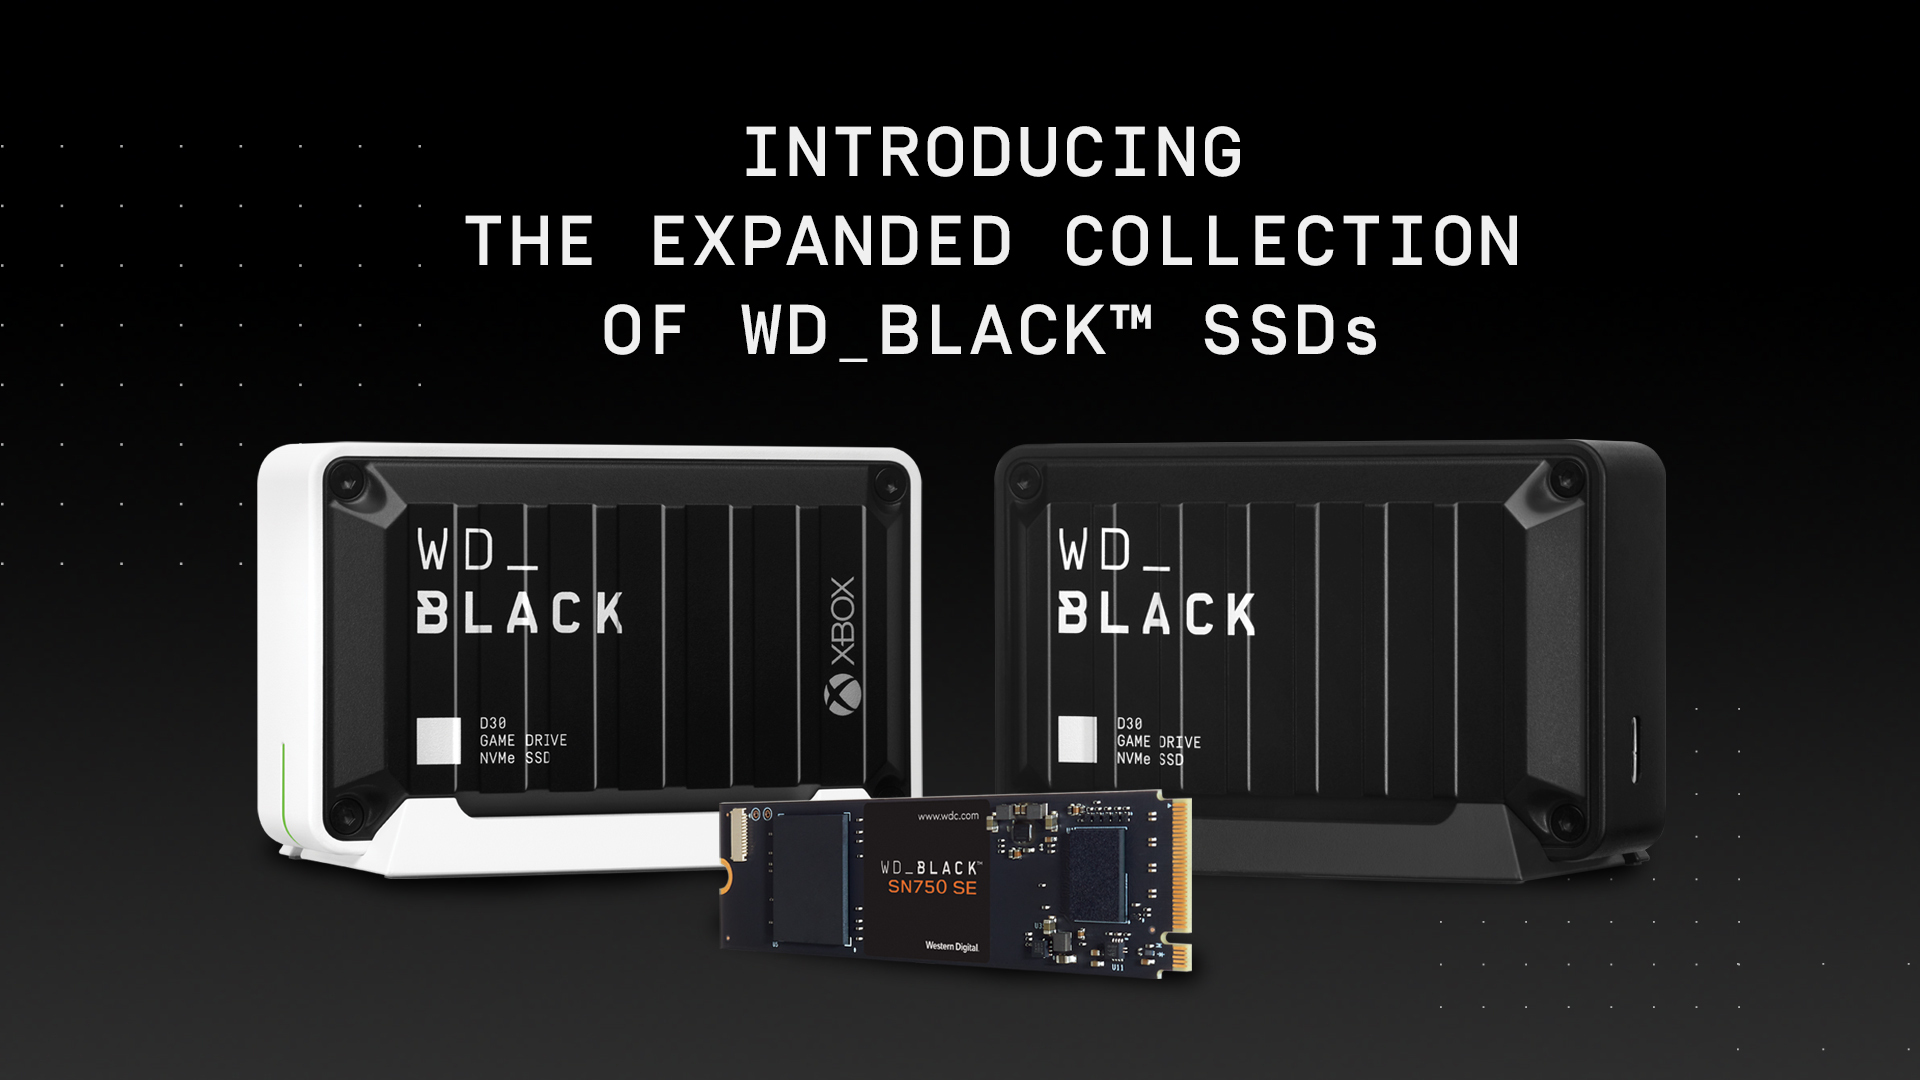 WD_BLACK™ D30 PlayStation™ (PS4 & PS5) Game Drive SSD